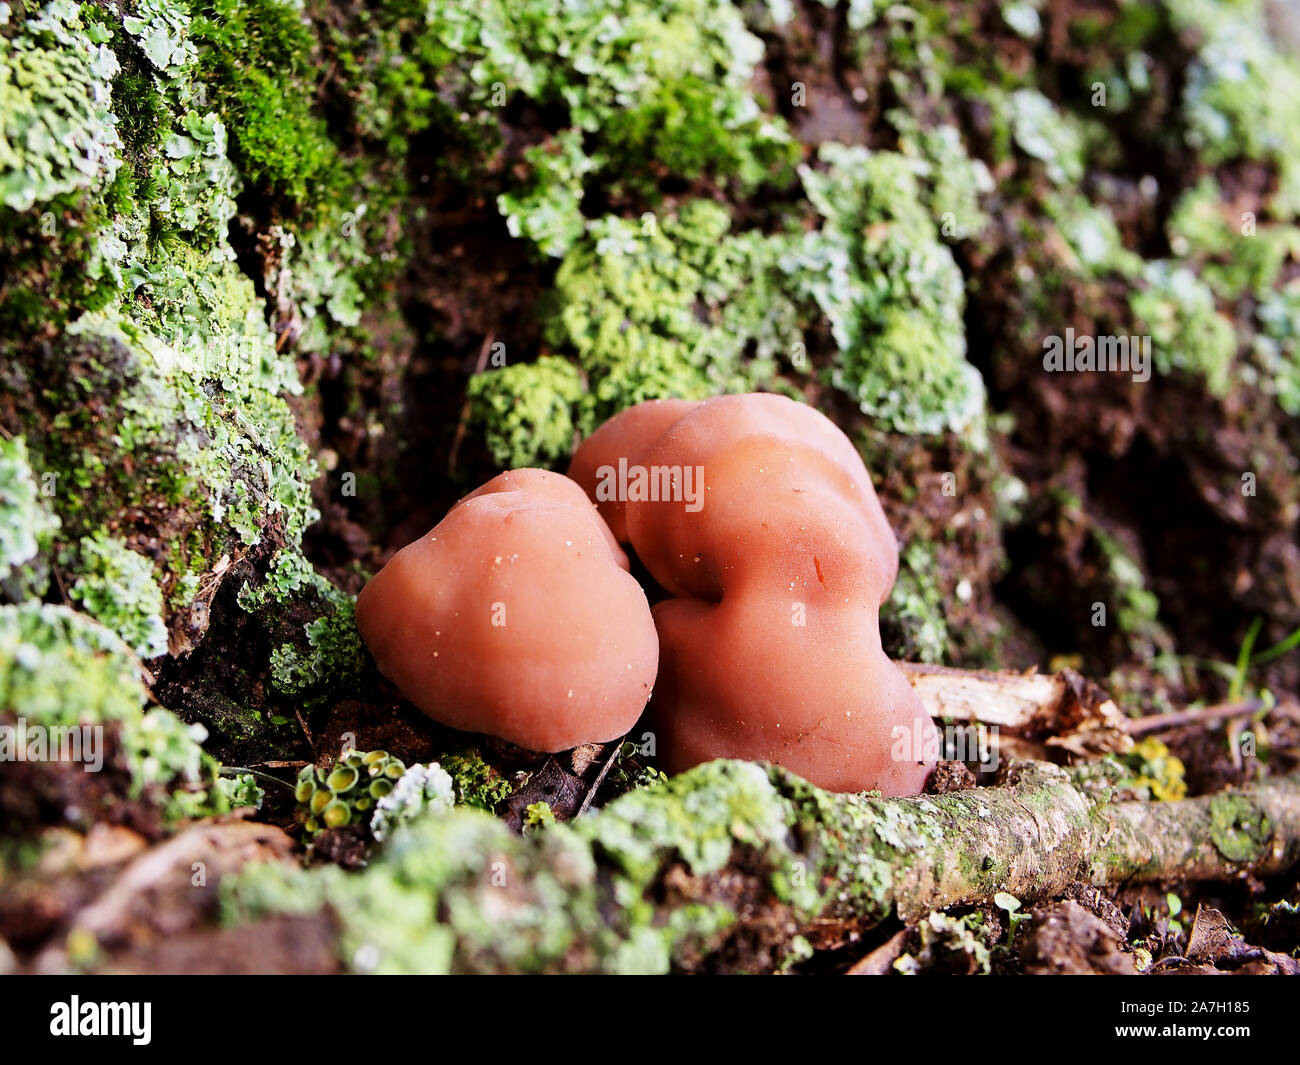 Wood Ear Fungus (Auricularia auricula-judae) also known as Jew's ear or jelly ear, growing on a tree trunk in Northamptonshire, UK Stock Photo